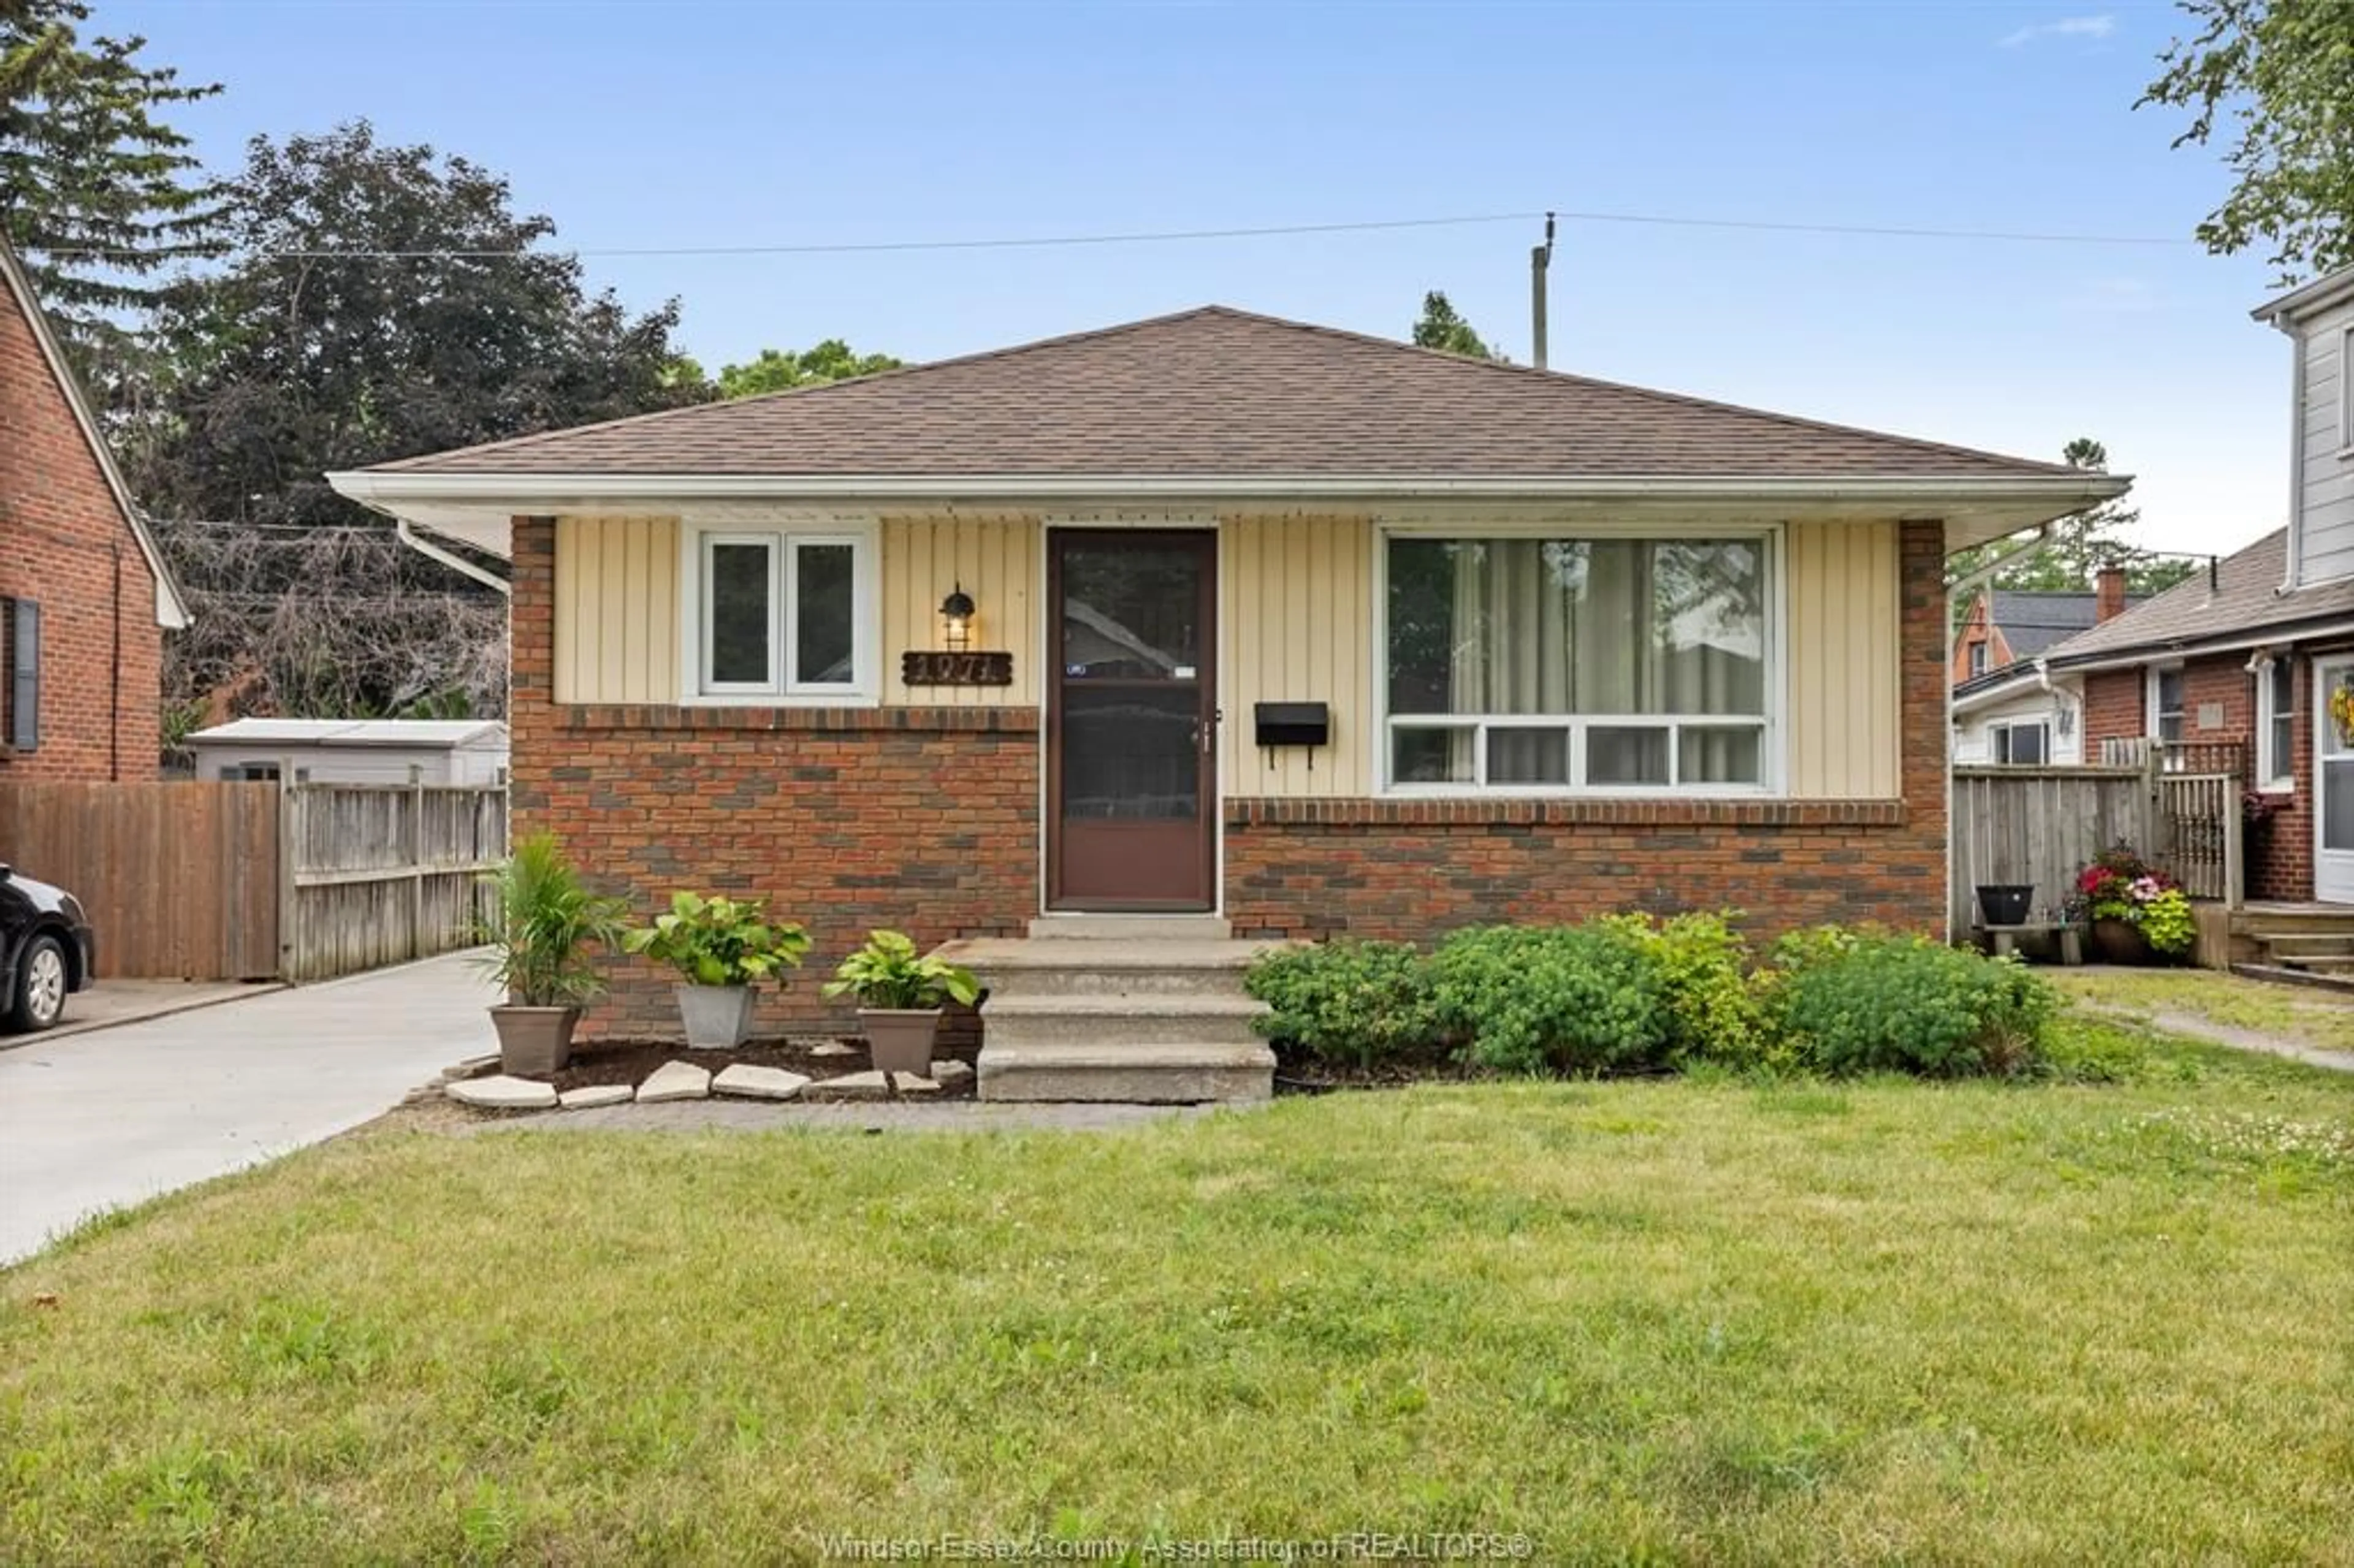 Home with brick exterior material for 1071 ST LOUIS Ave, Windsor Ontario N8S 2K9